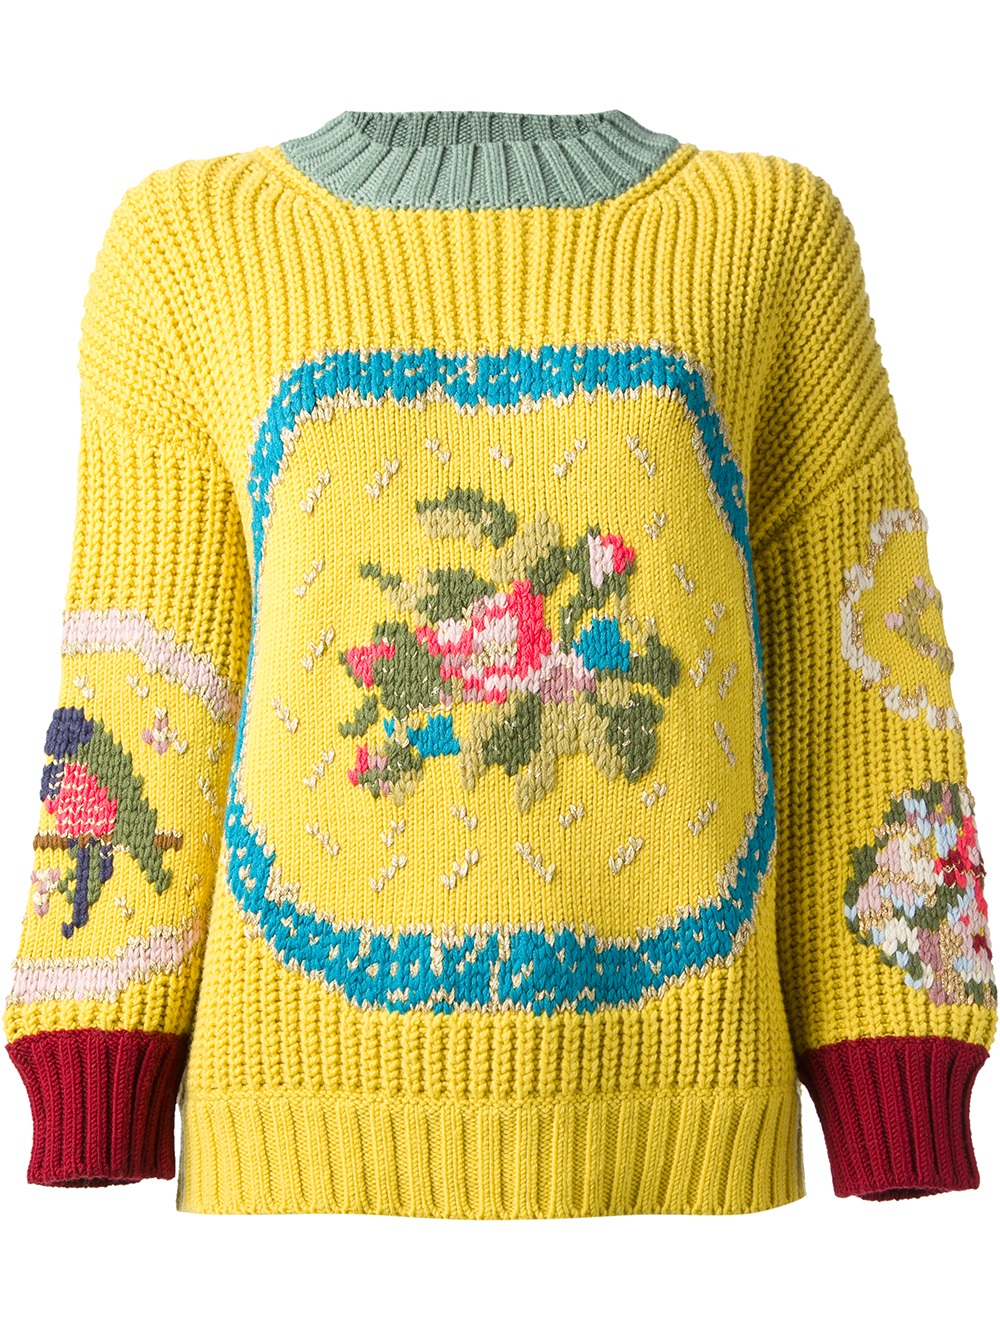 Antonio Marras Floral Chunky Knit Jumper in Yellow (green) | Lyst